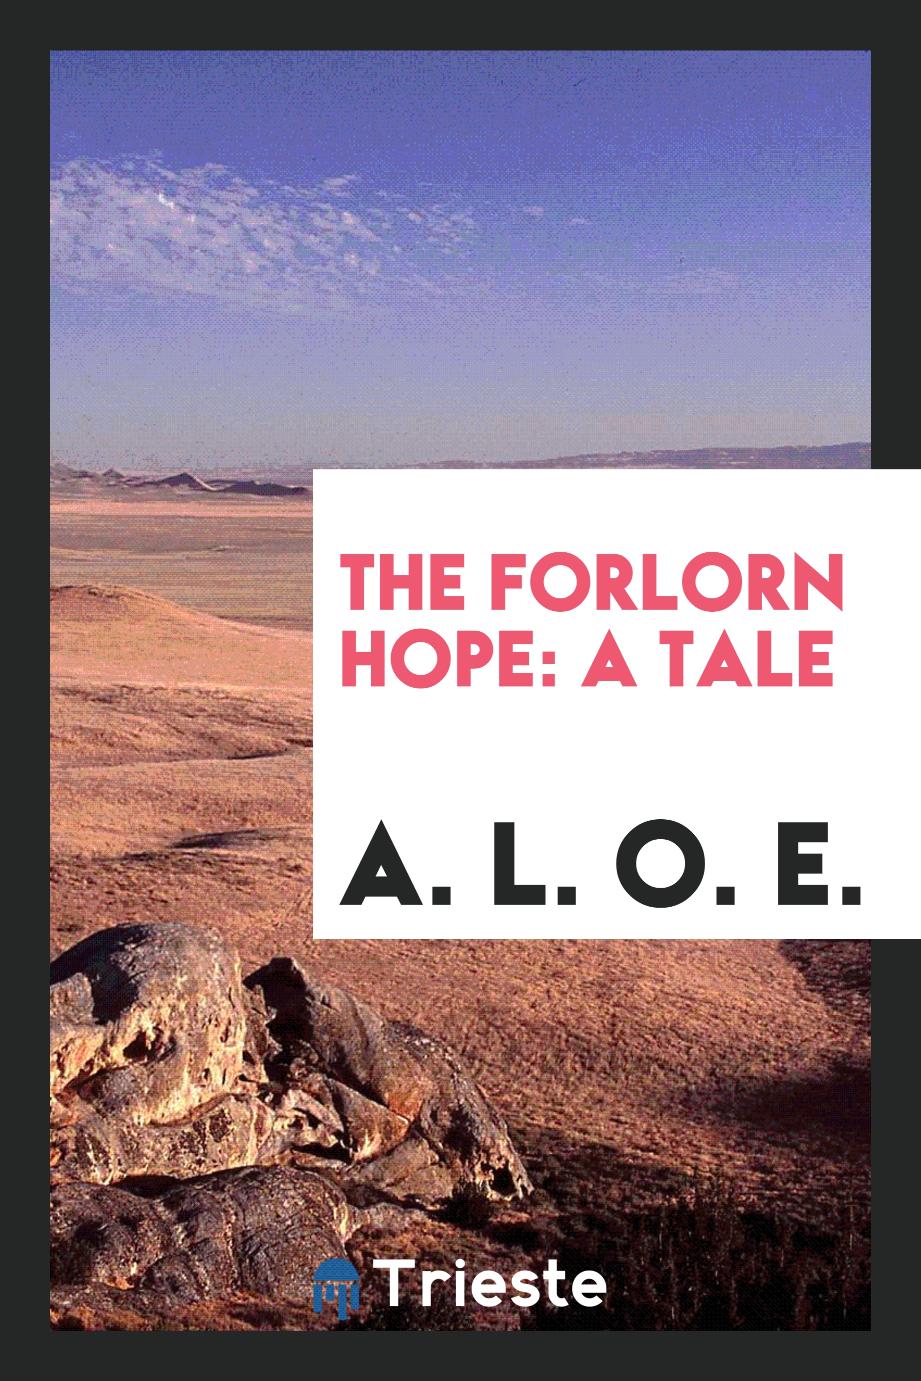 The Forlorn Hope: A Tale